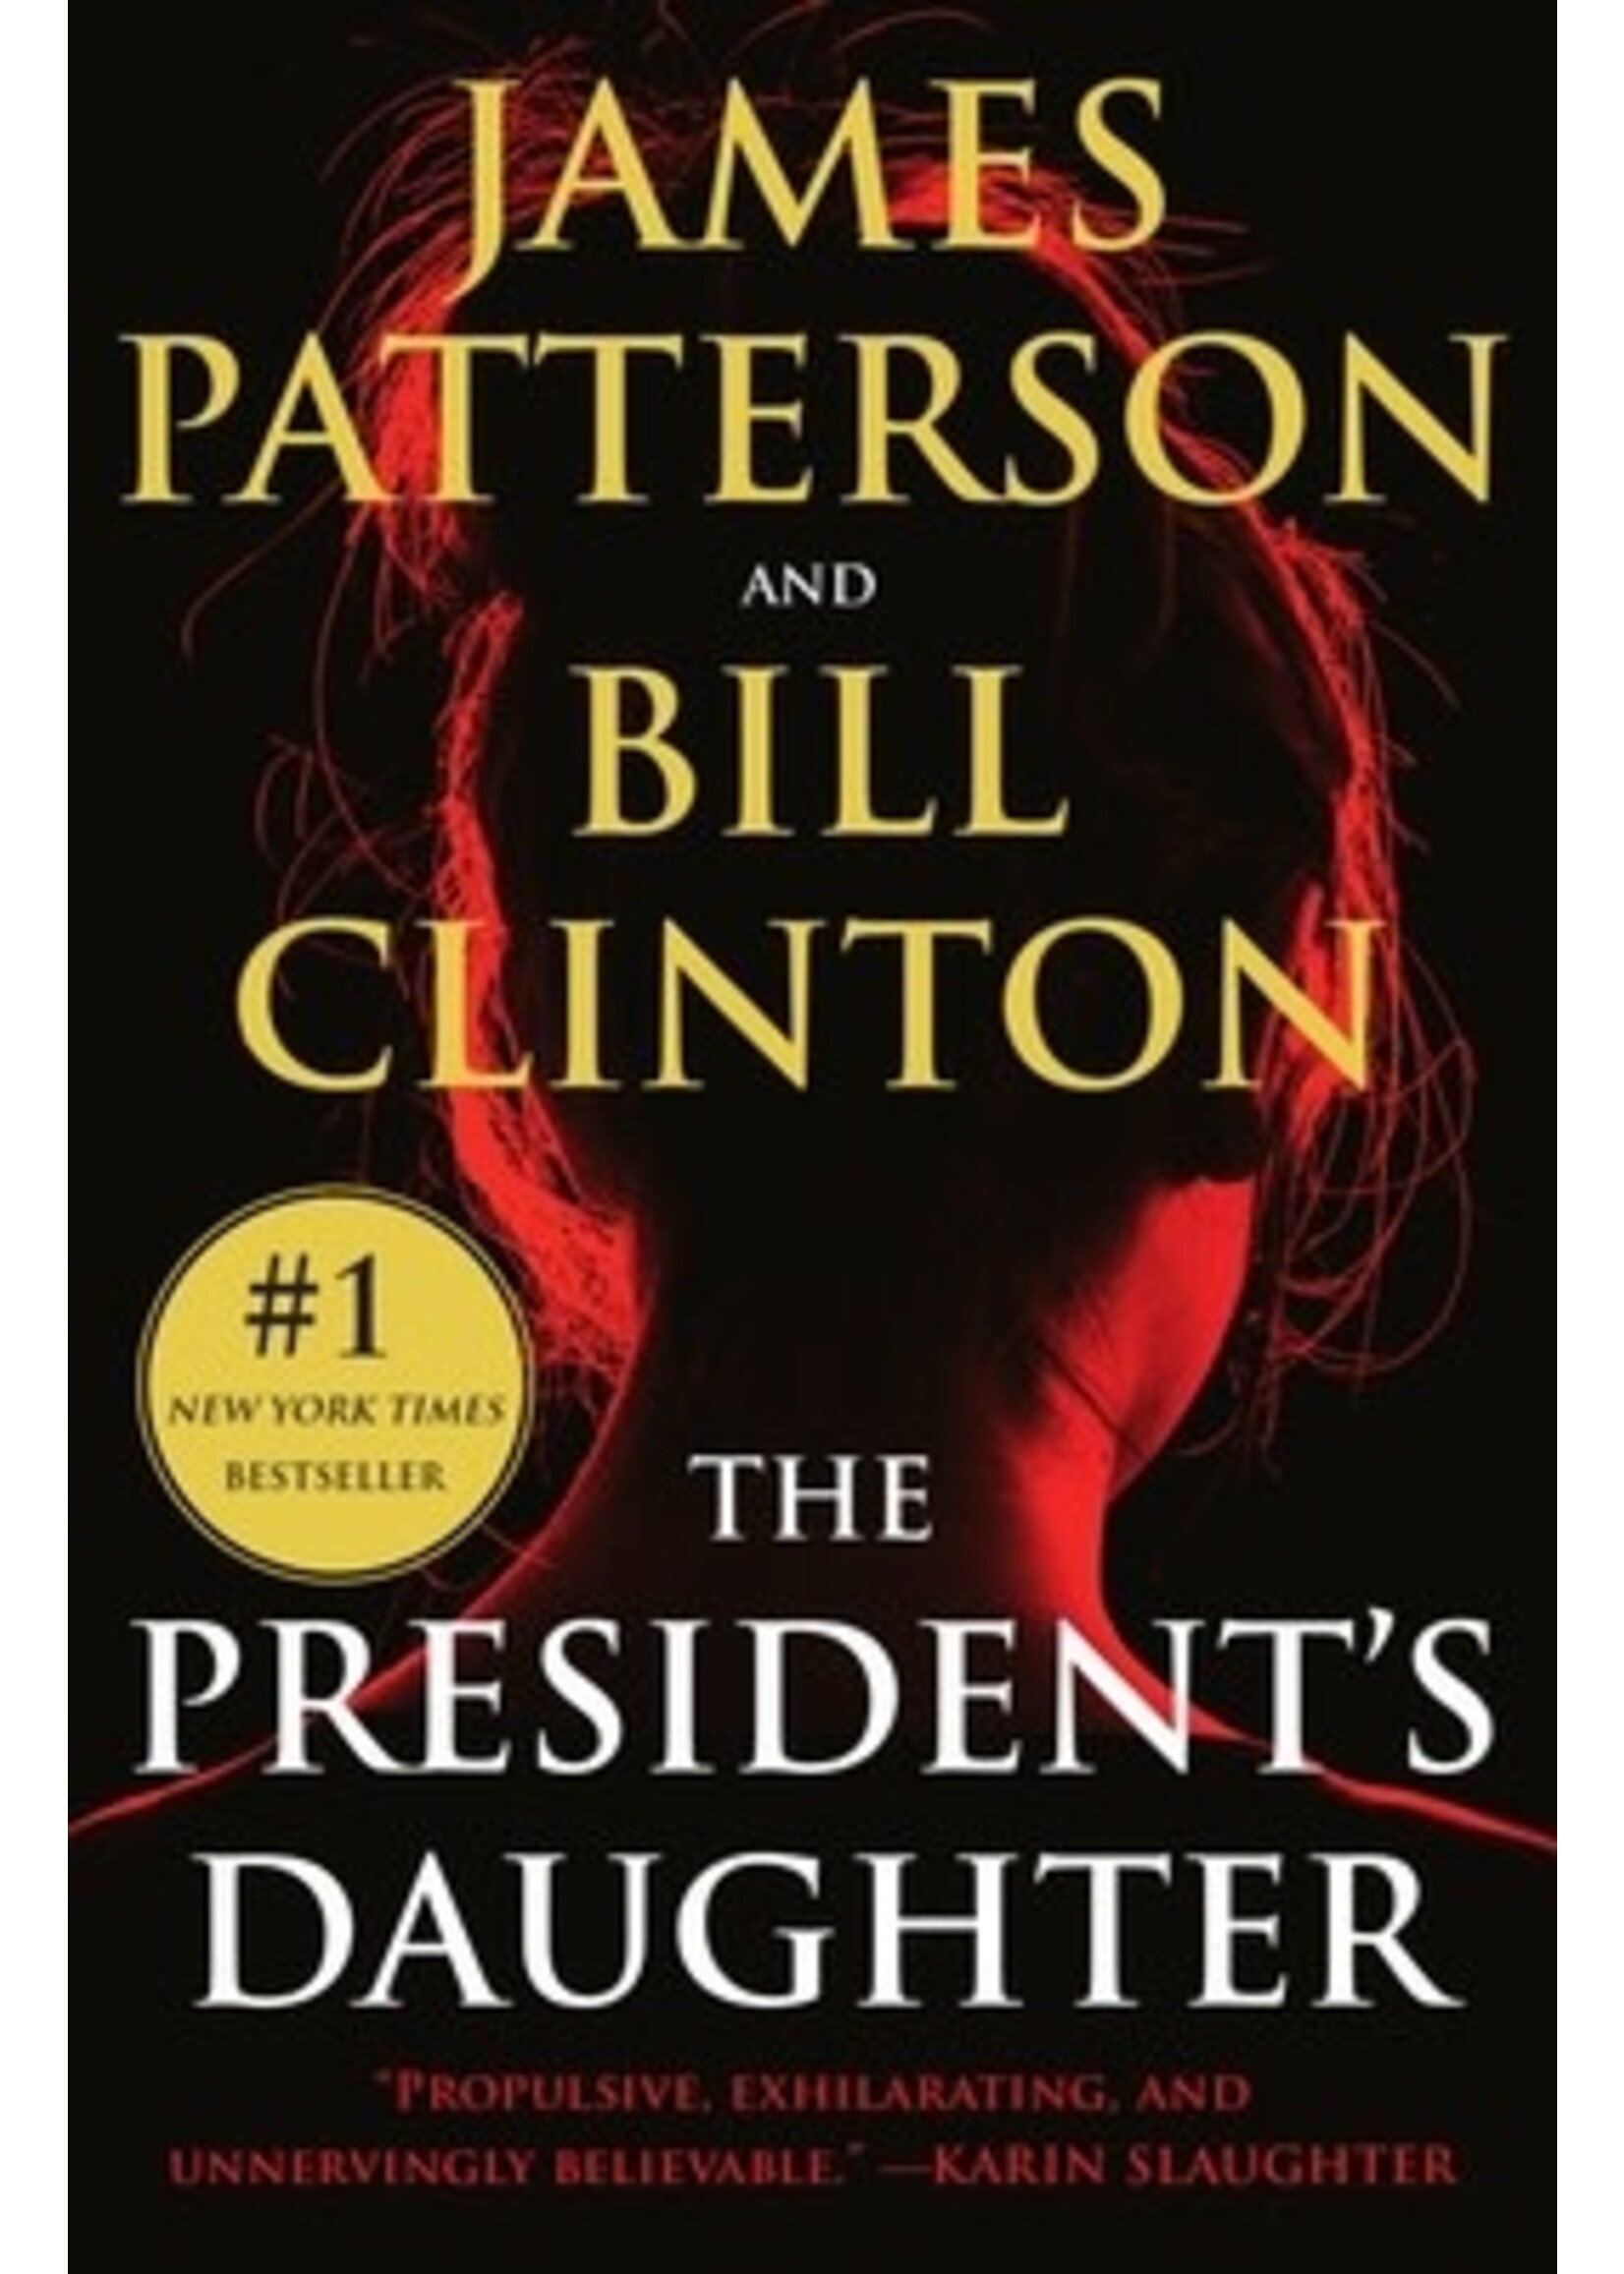 The President's Daughter by Bill Clinton, James Patterson